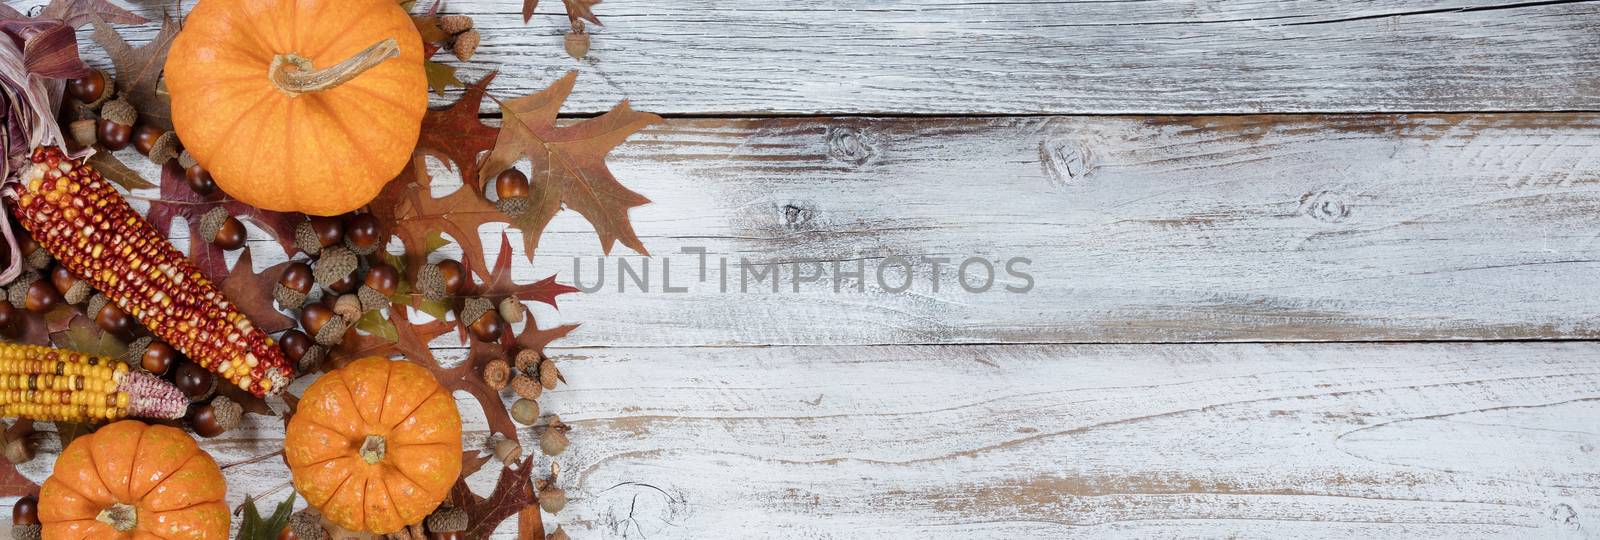 Autumn acorns, pumpkins, corn and leaves on rustic white wood ba by tab1962